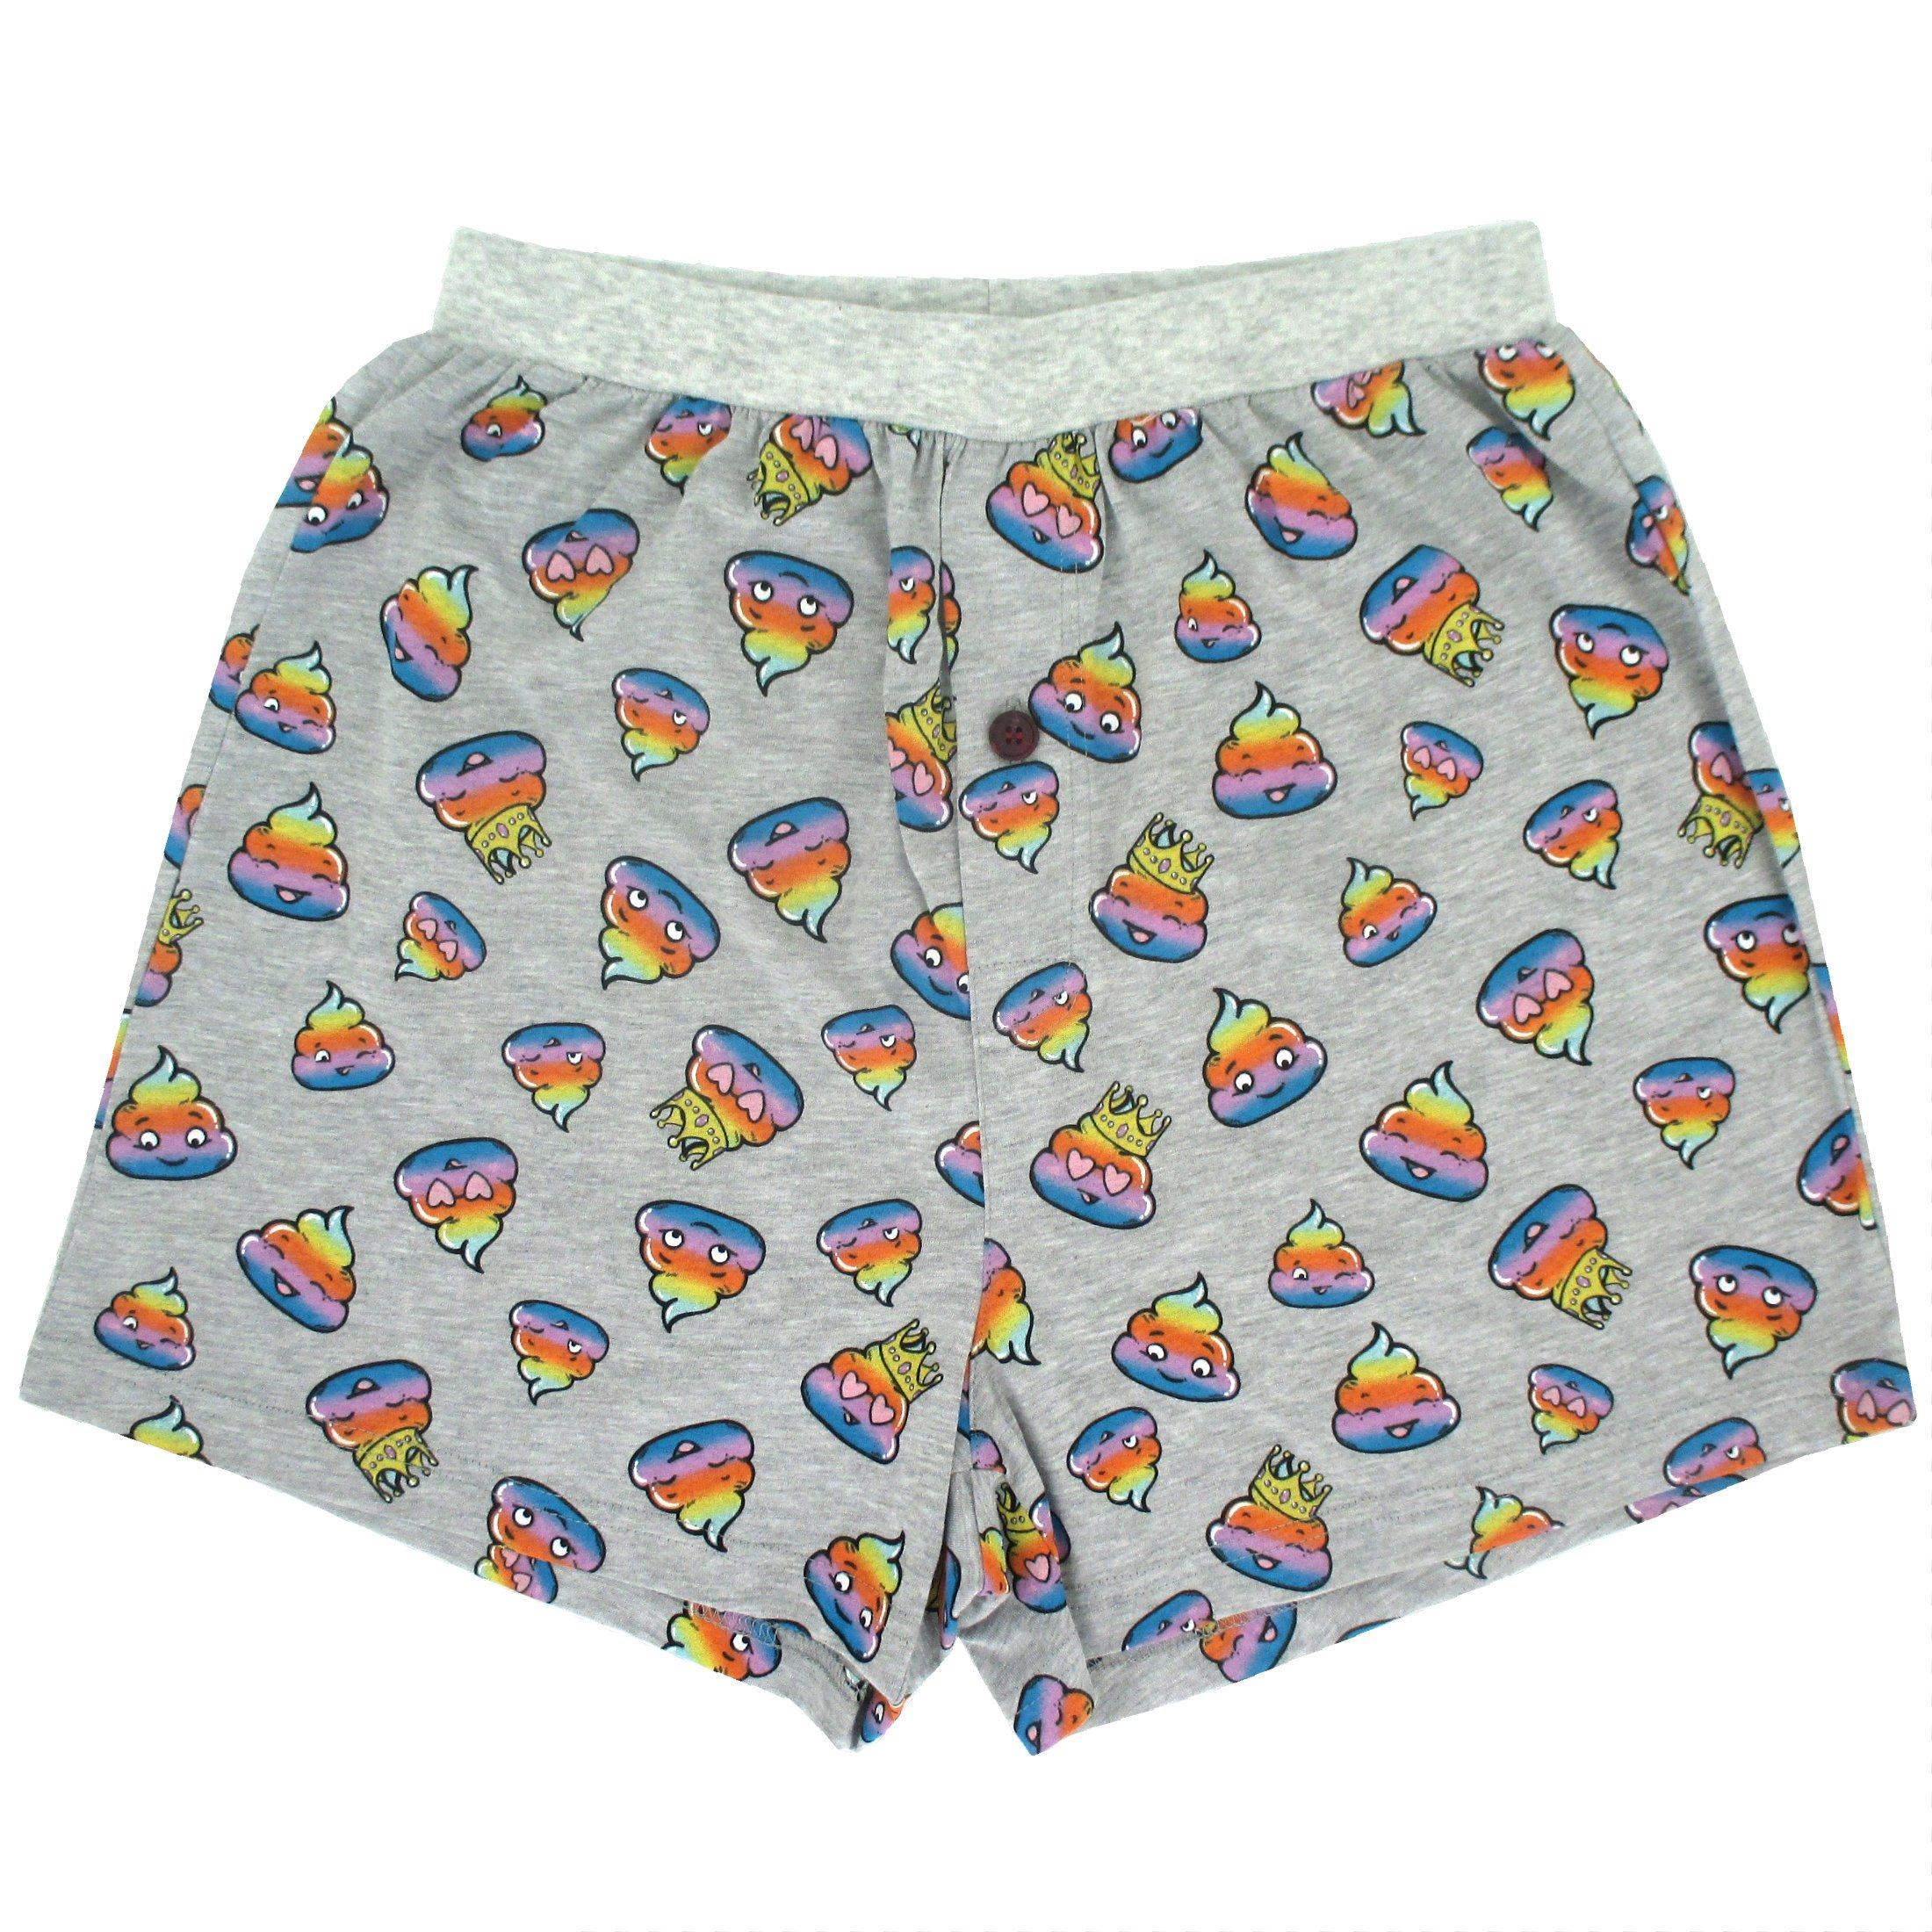 Funny Rainbow Smiley Poop Patterned Cotton Knit Boxer Shorts for Men